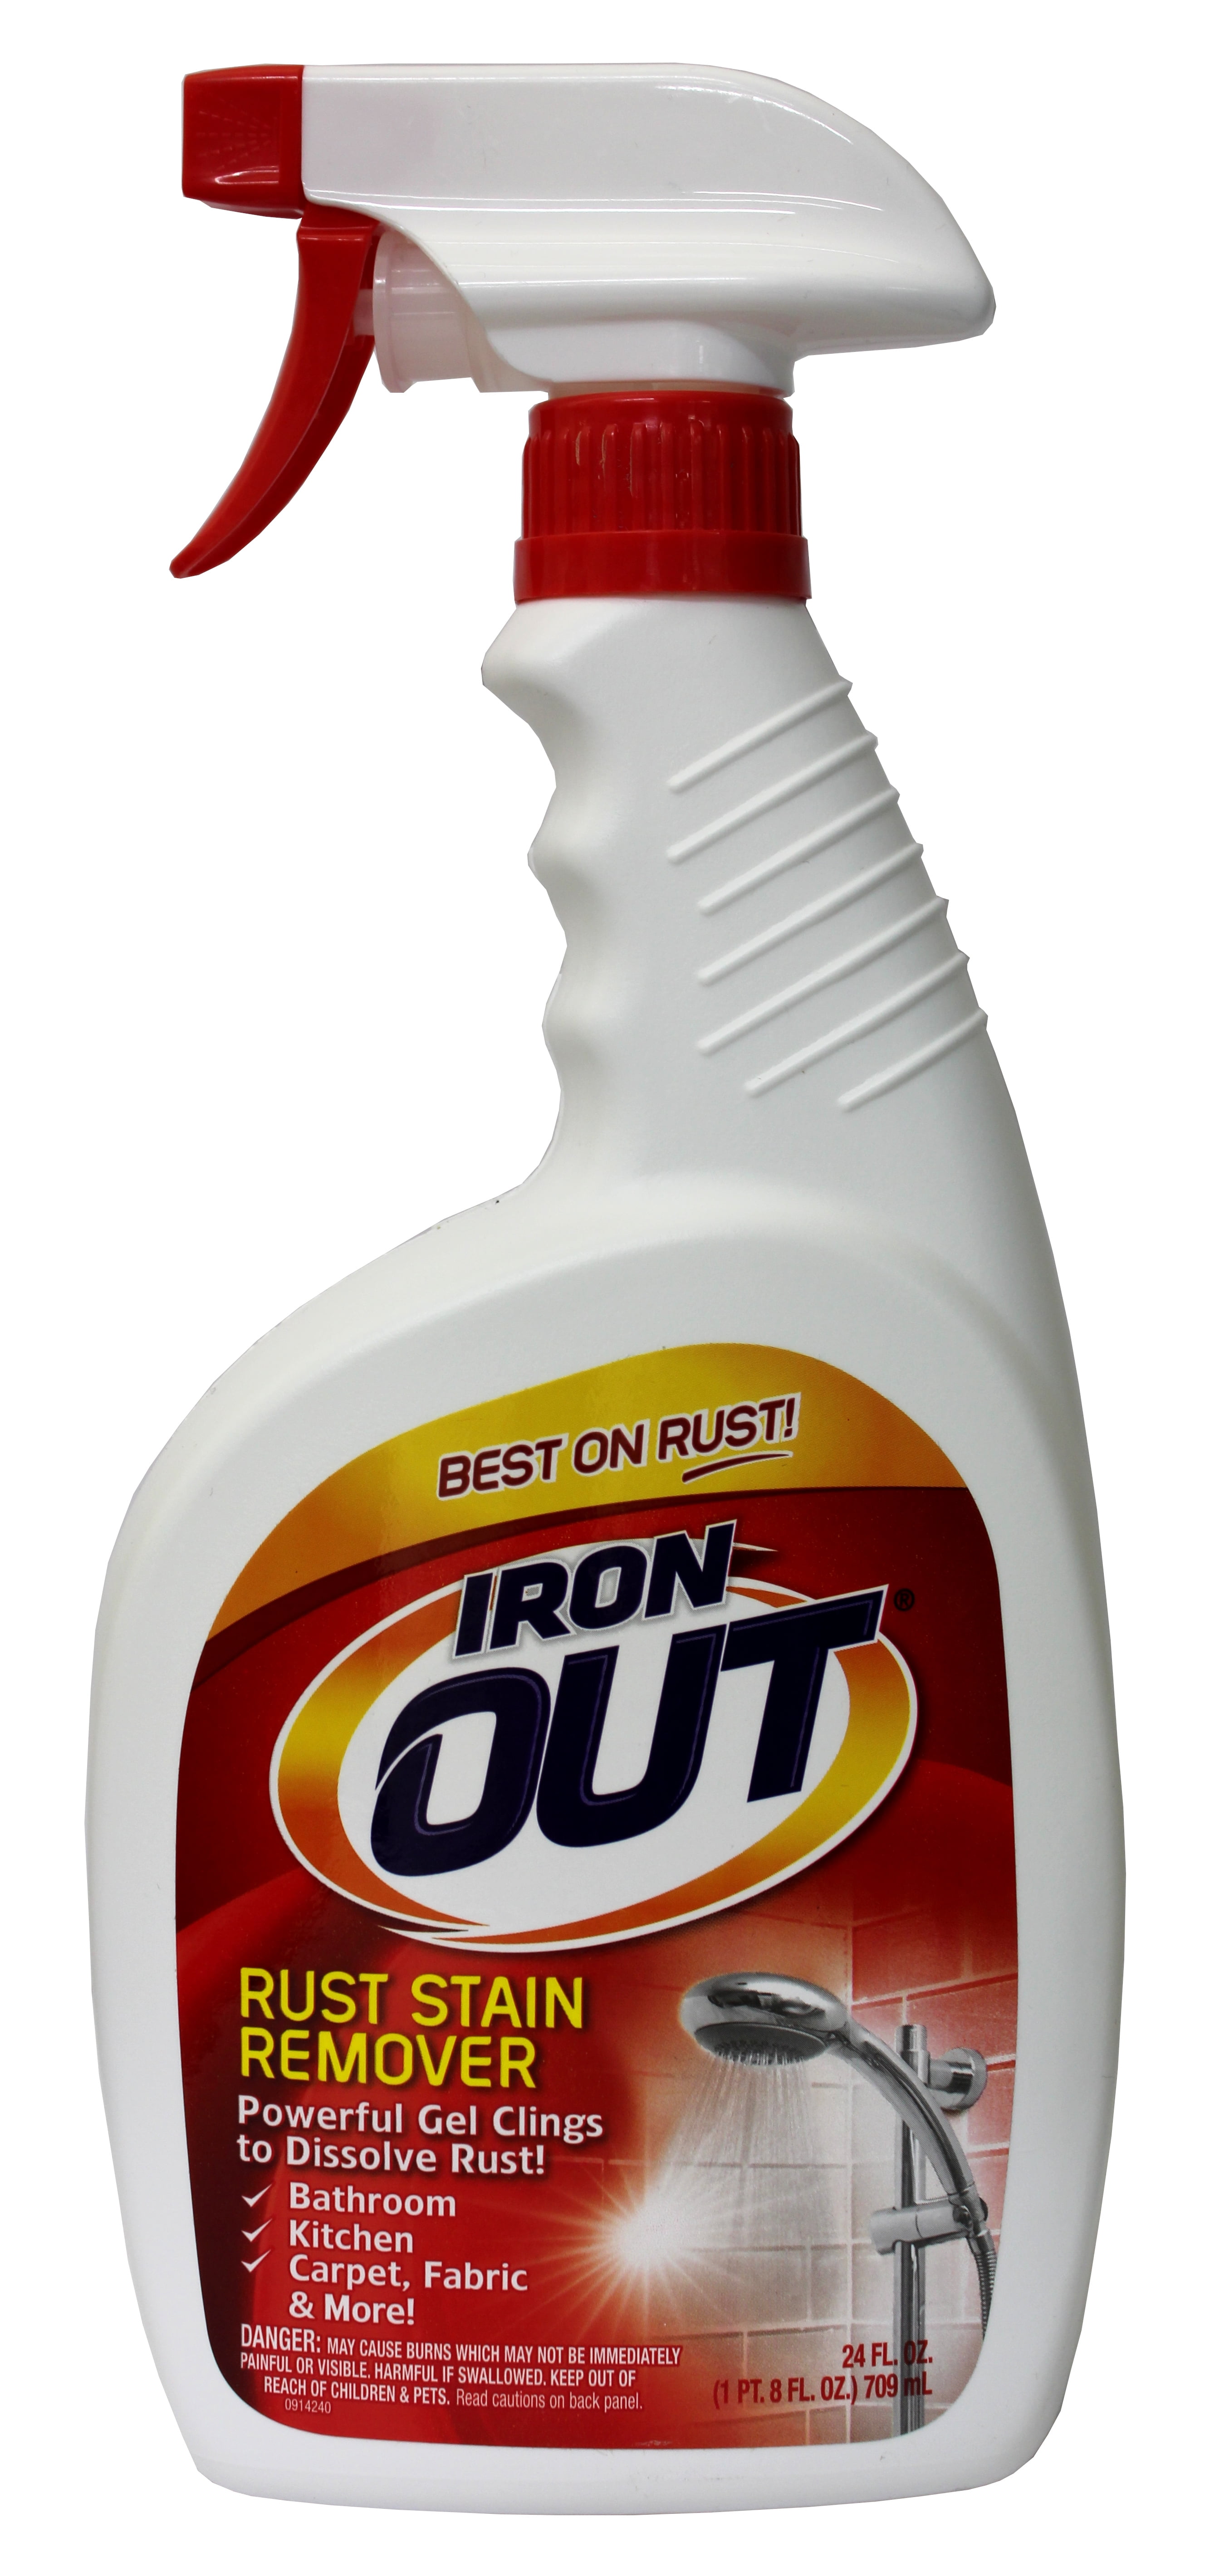 I tried everything I knew of to get these stains off (iron out bath for  days, CLR, muriatic, textile gun). Then I tried Whink rust stain remover  for 15 minutes, here are